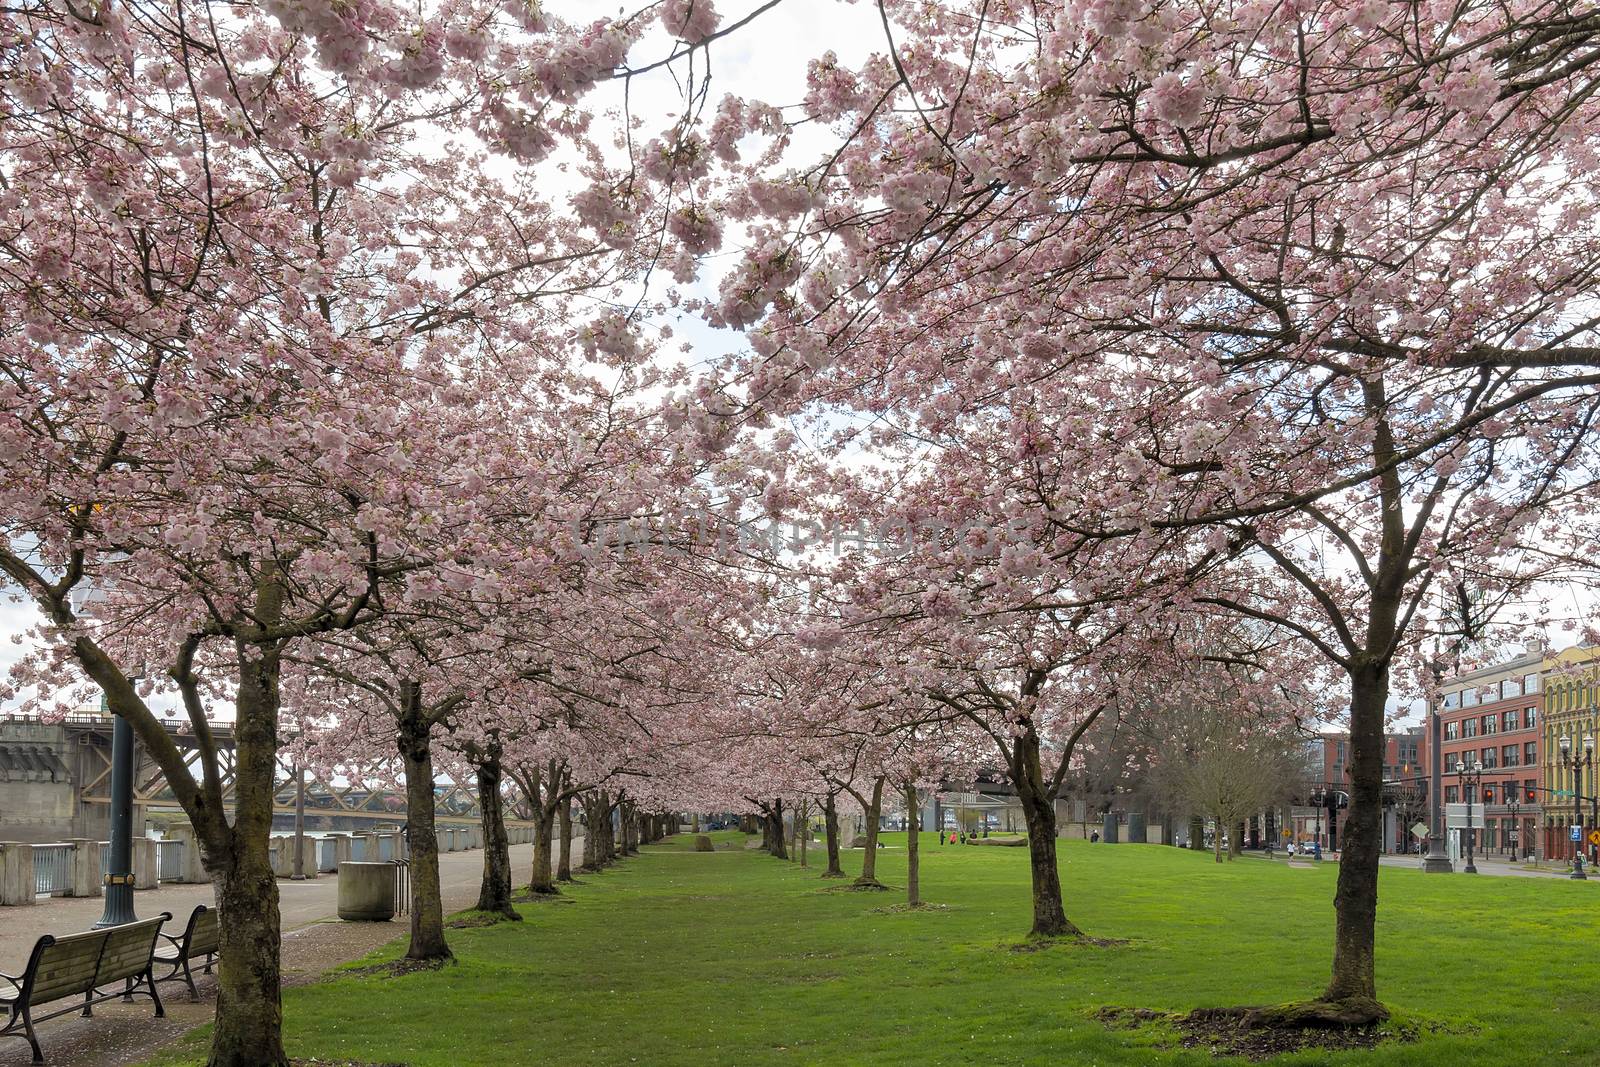 Cherry Blossom row of trees in bloom at Portland Oregon Waterfront in Spring Season